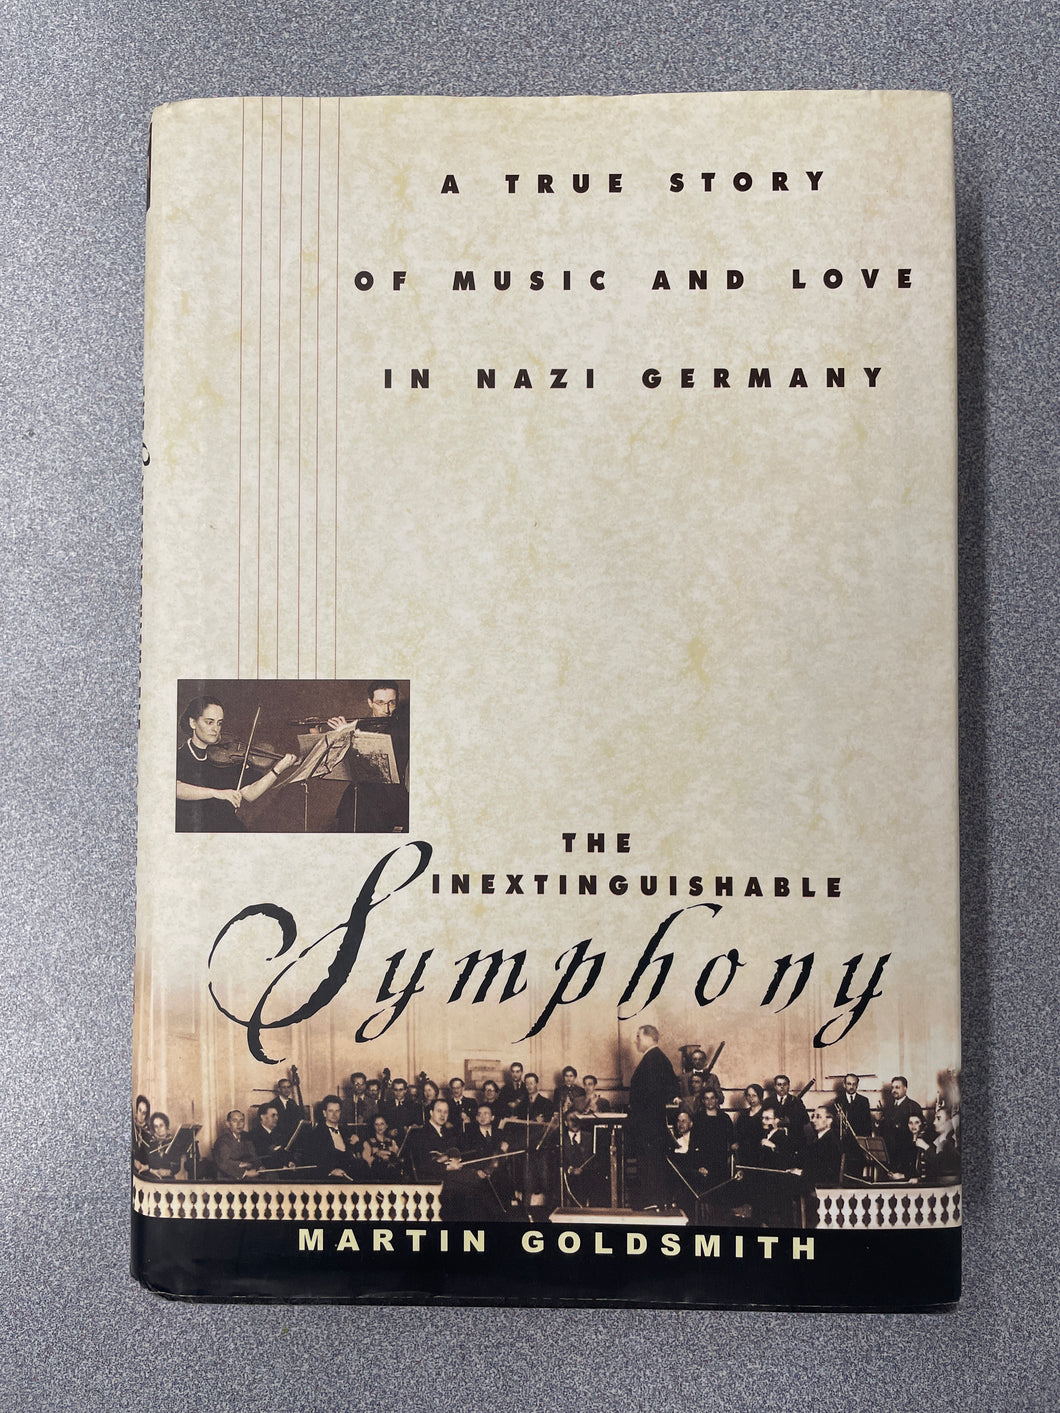 The Inextinguishable Symphony, A True Story of Music and Love in Nazi Germany, Goldsmith, Martin [2000] TS 3/24